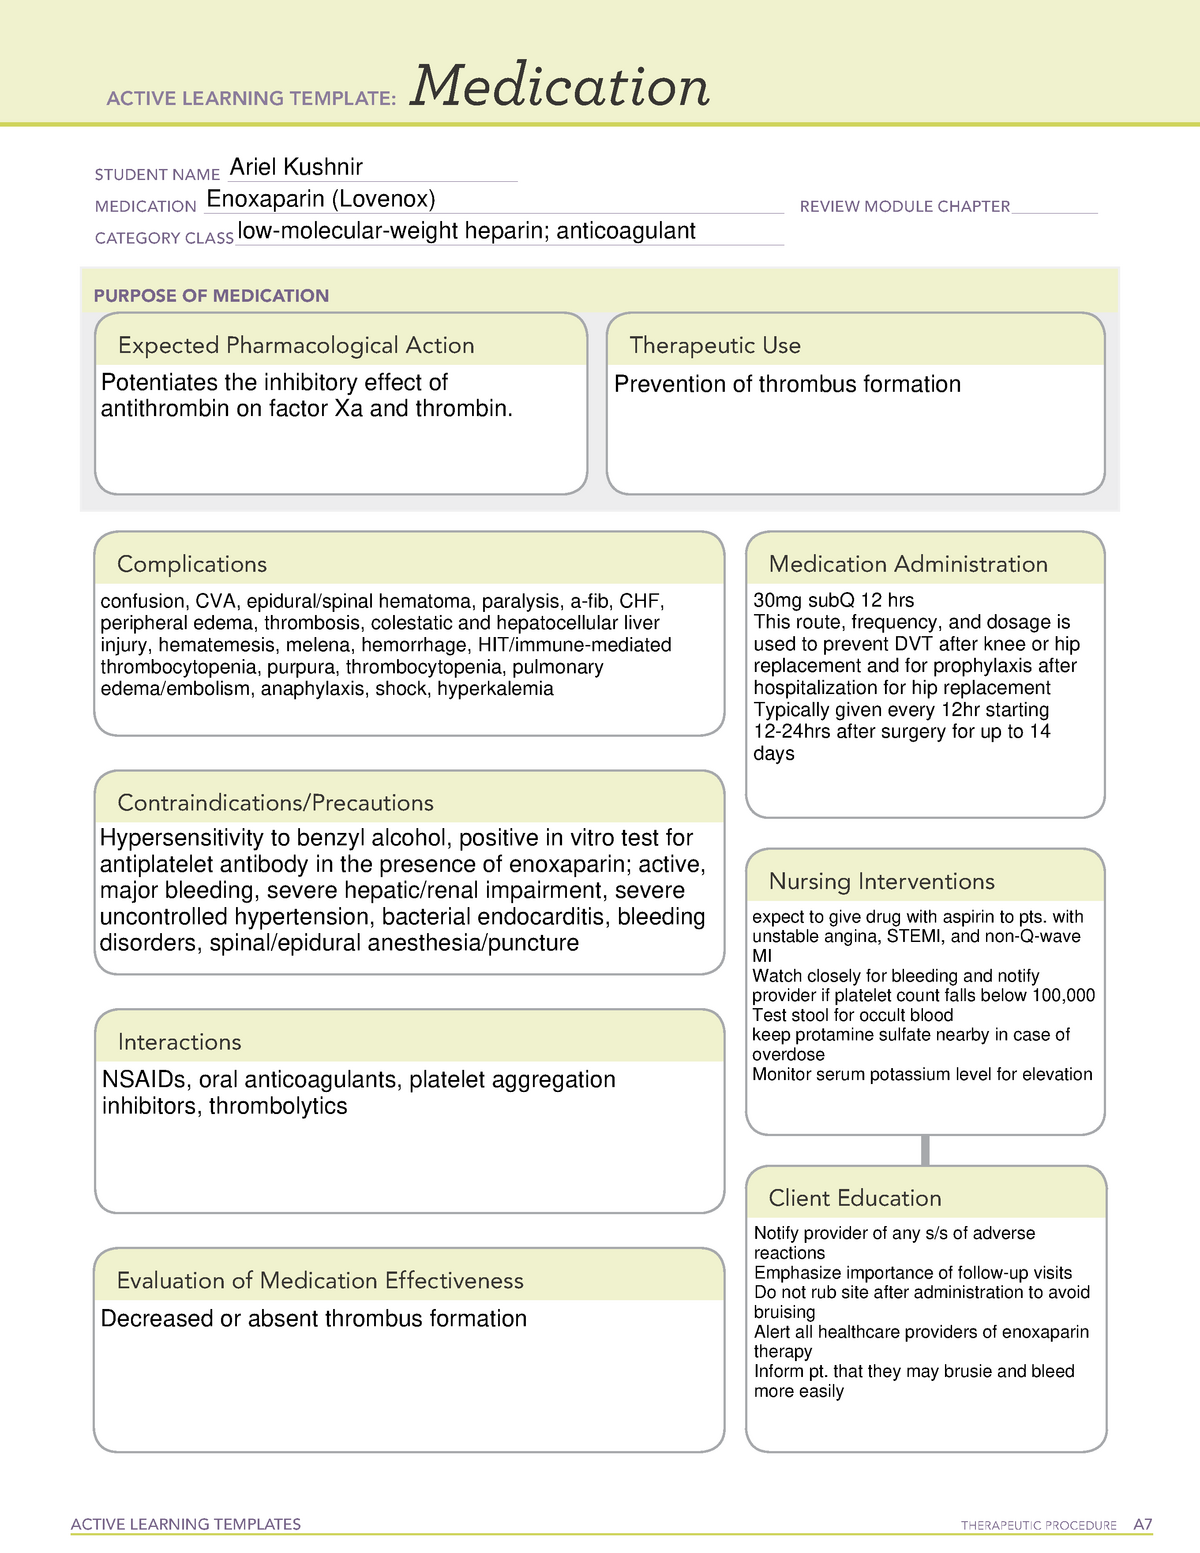 enoxaparin-med-sheet-active-learning-templates-therapeutic-procedure